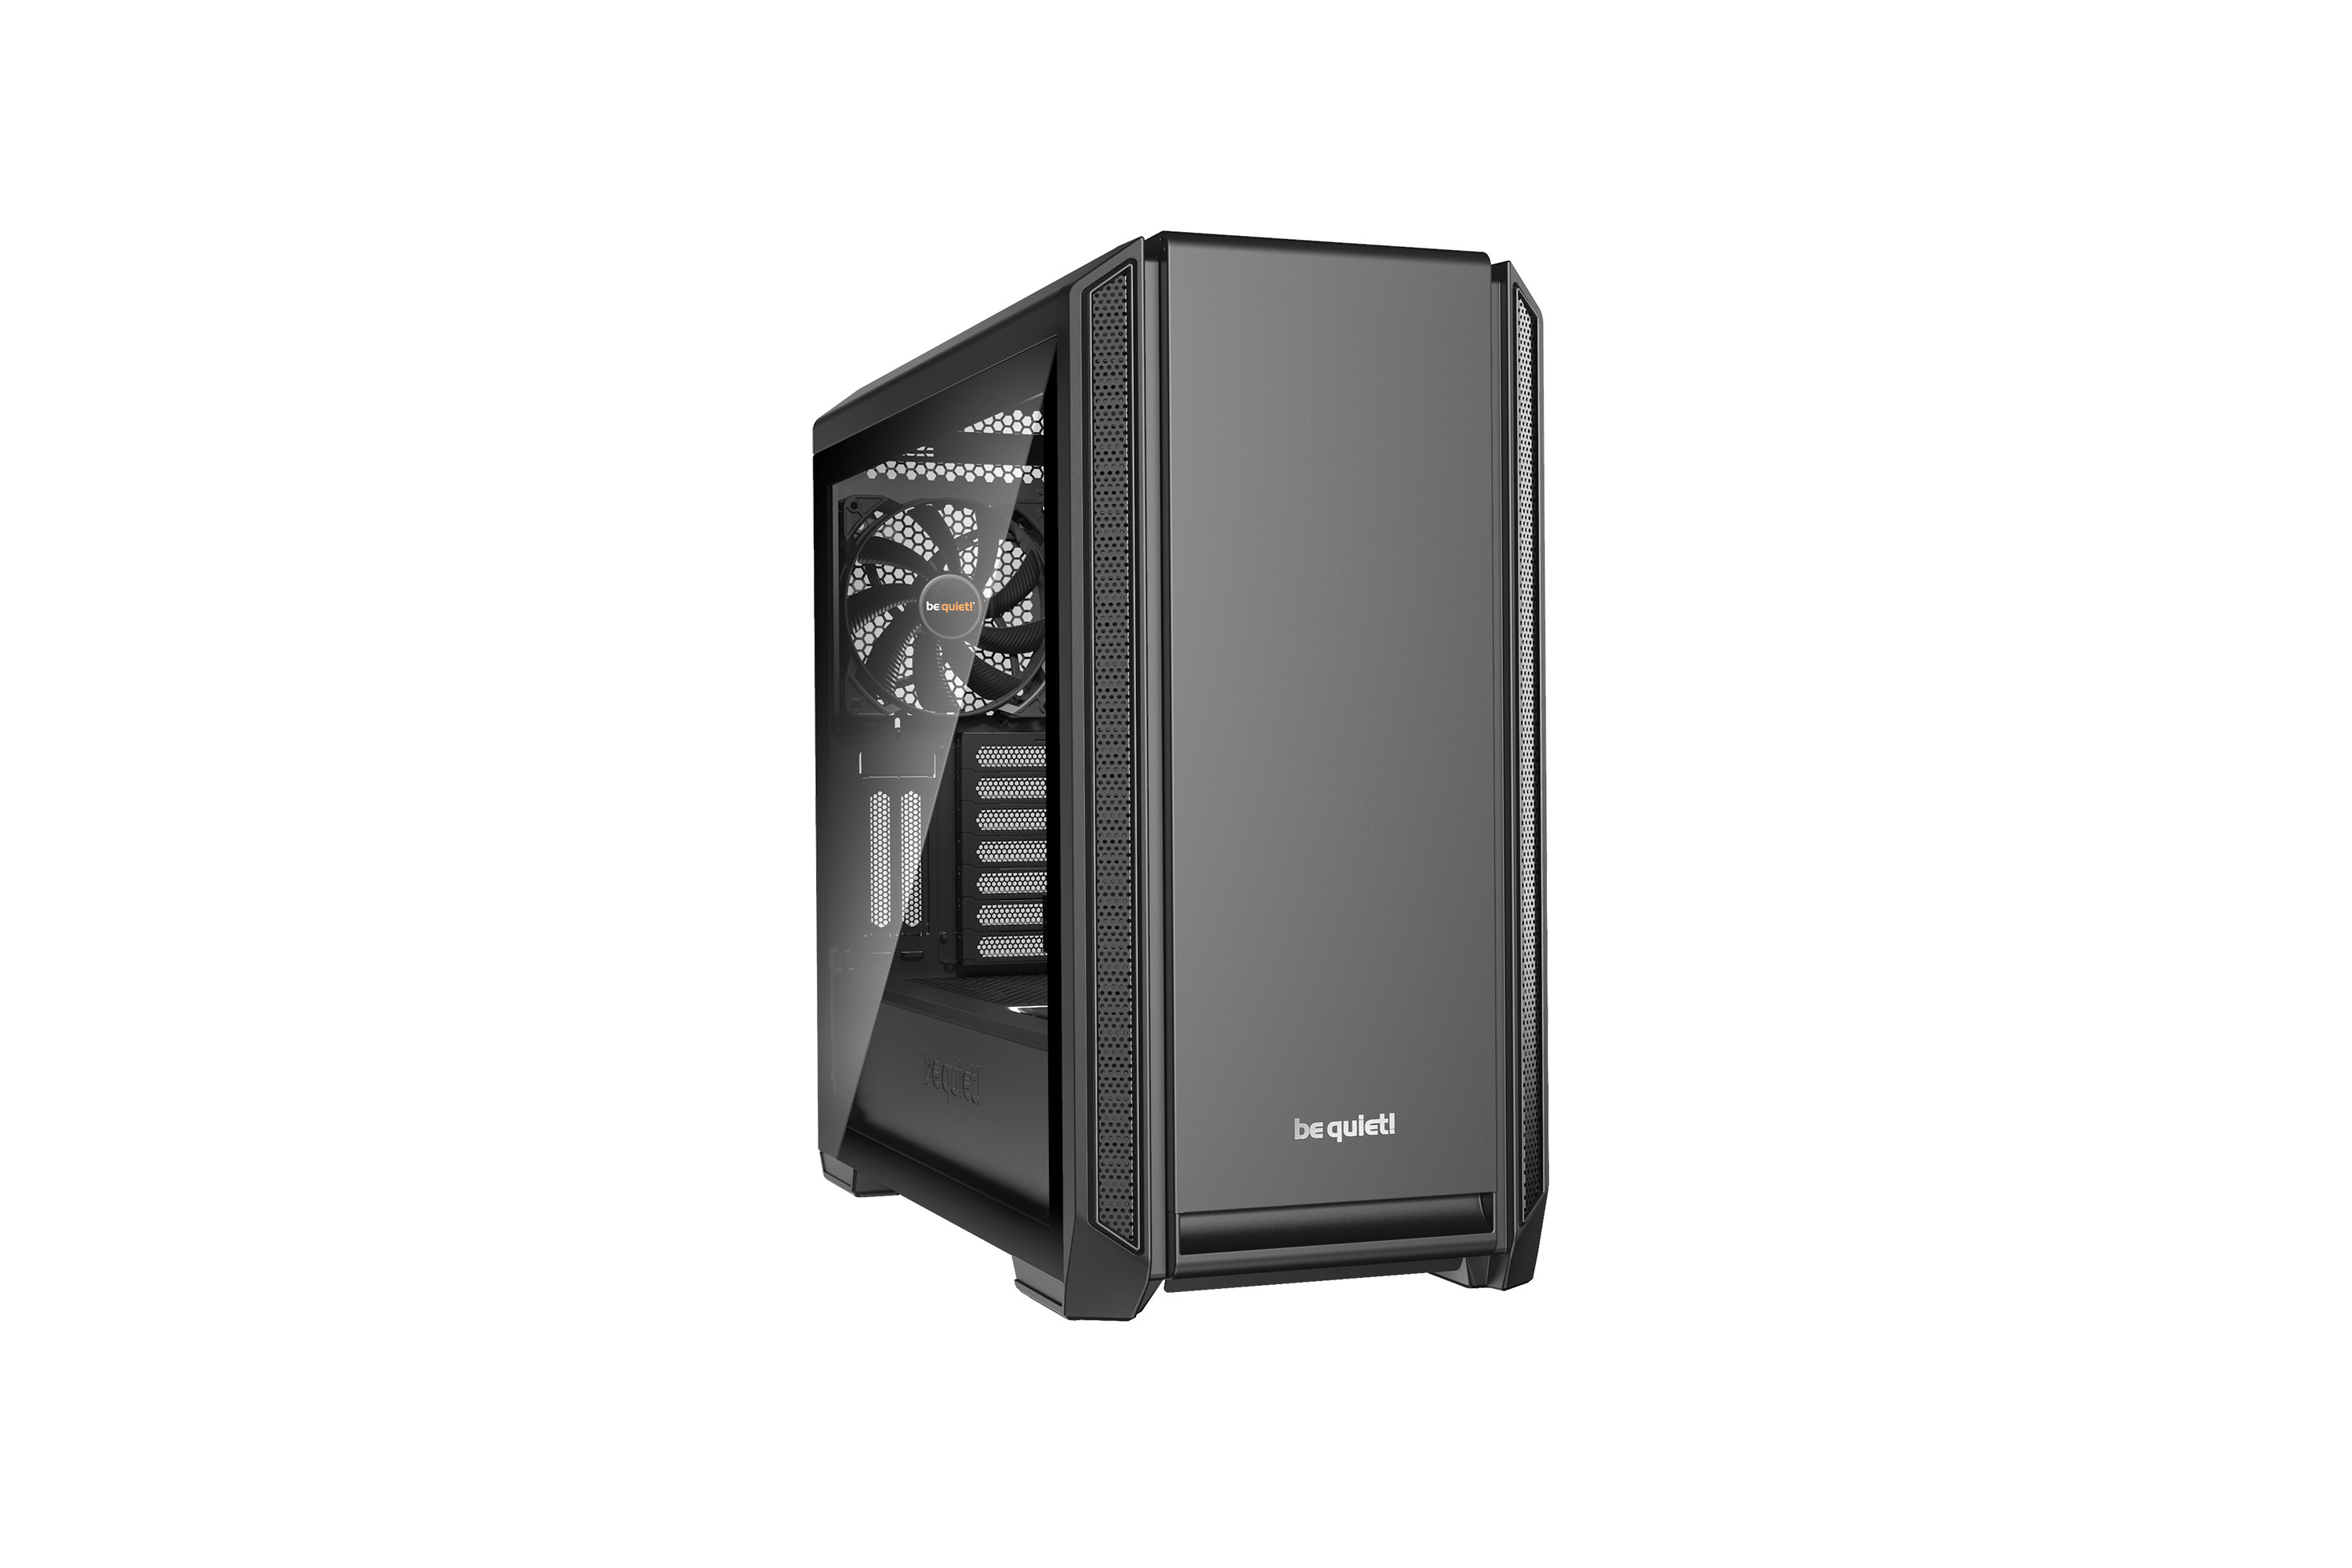 be quiet! Silent Base 601 Window Black, 532 x 240 x 514, IO-panel 2x USB 3.0, 1x USB 2.0, HD Audio, 3 (7) x 3,5, 6 (14) x 2,5, inc 2x 140 mm Pure Wings 2, dual air channel cooling, Tinted and Tempered Glass side panel